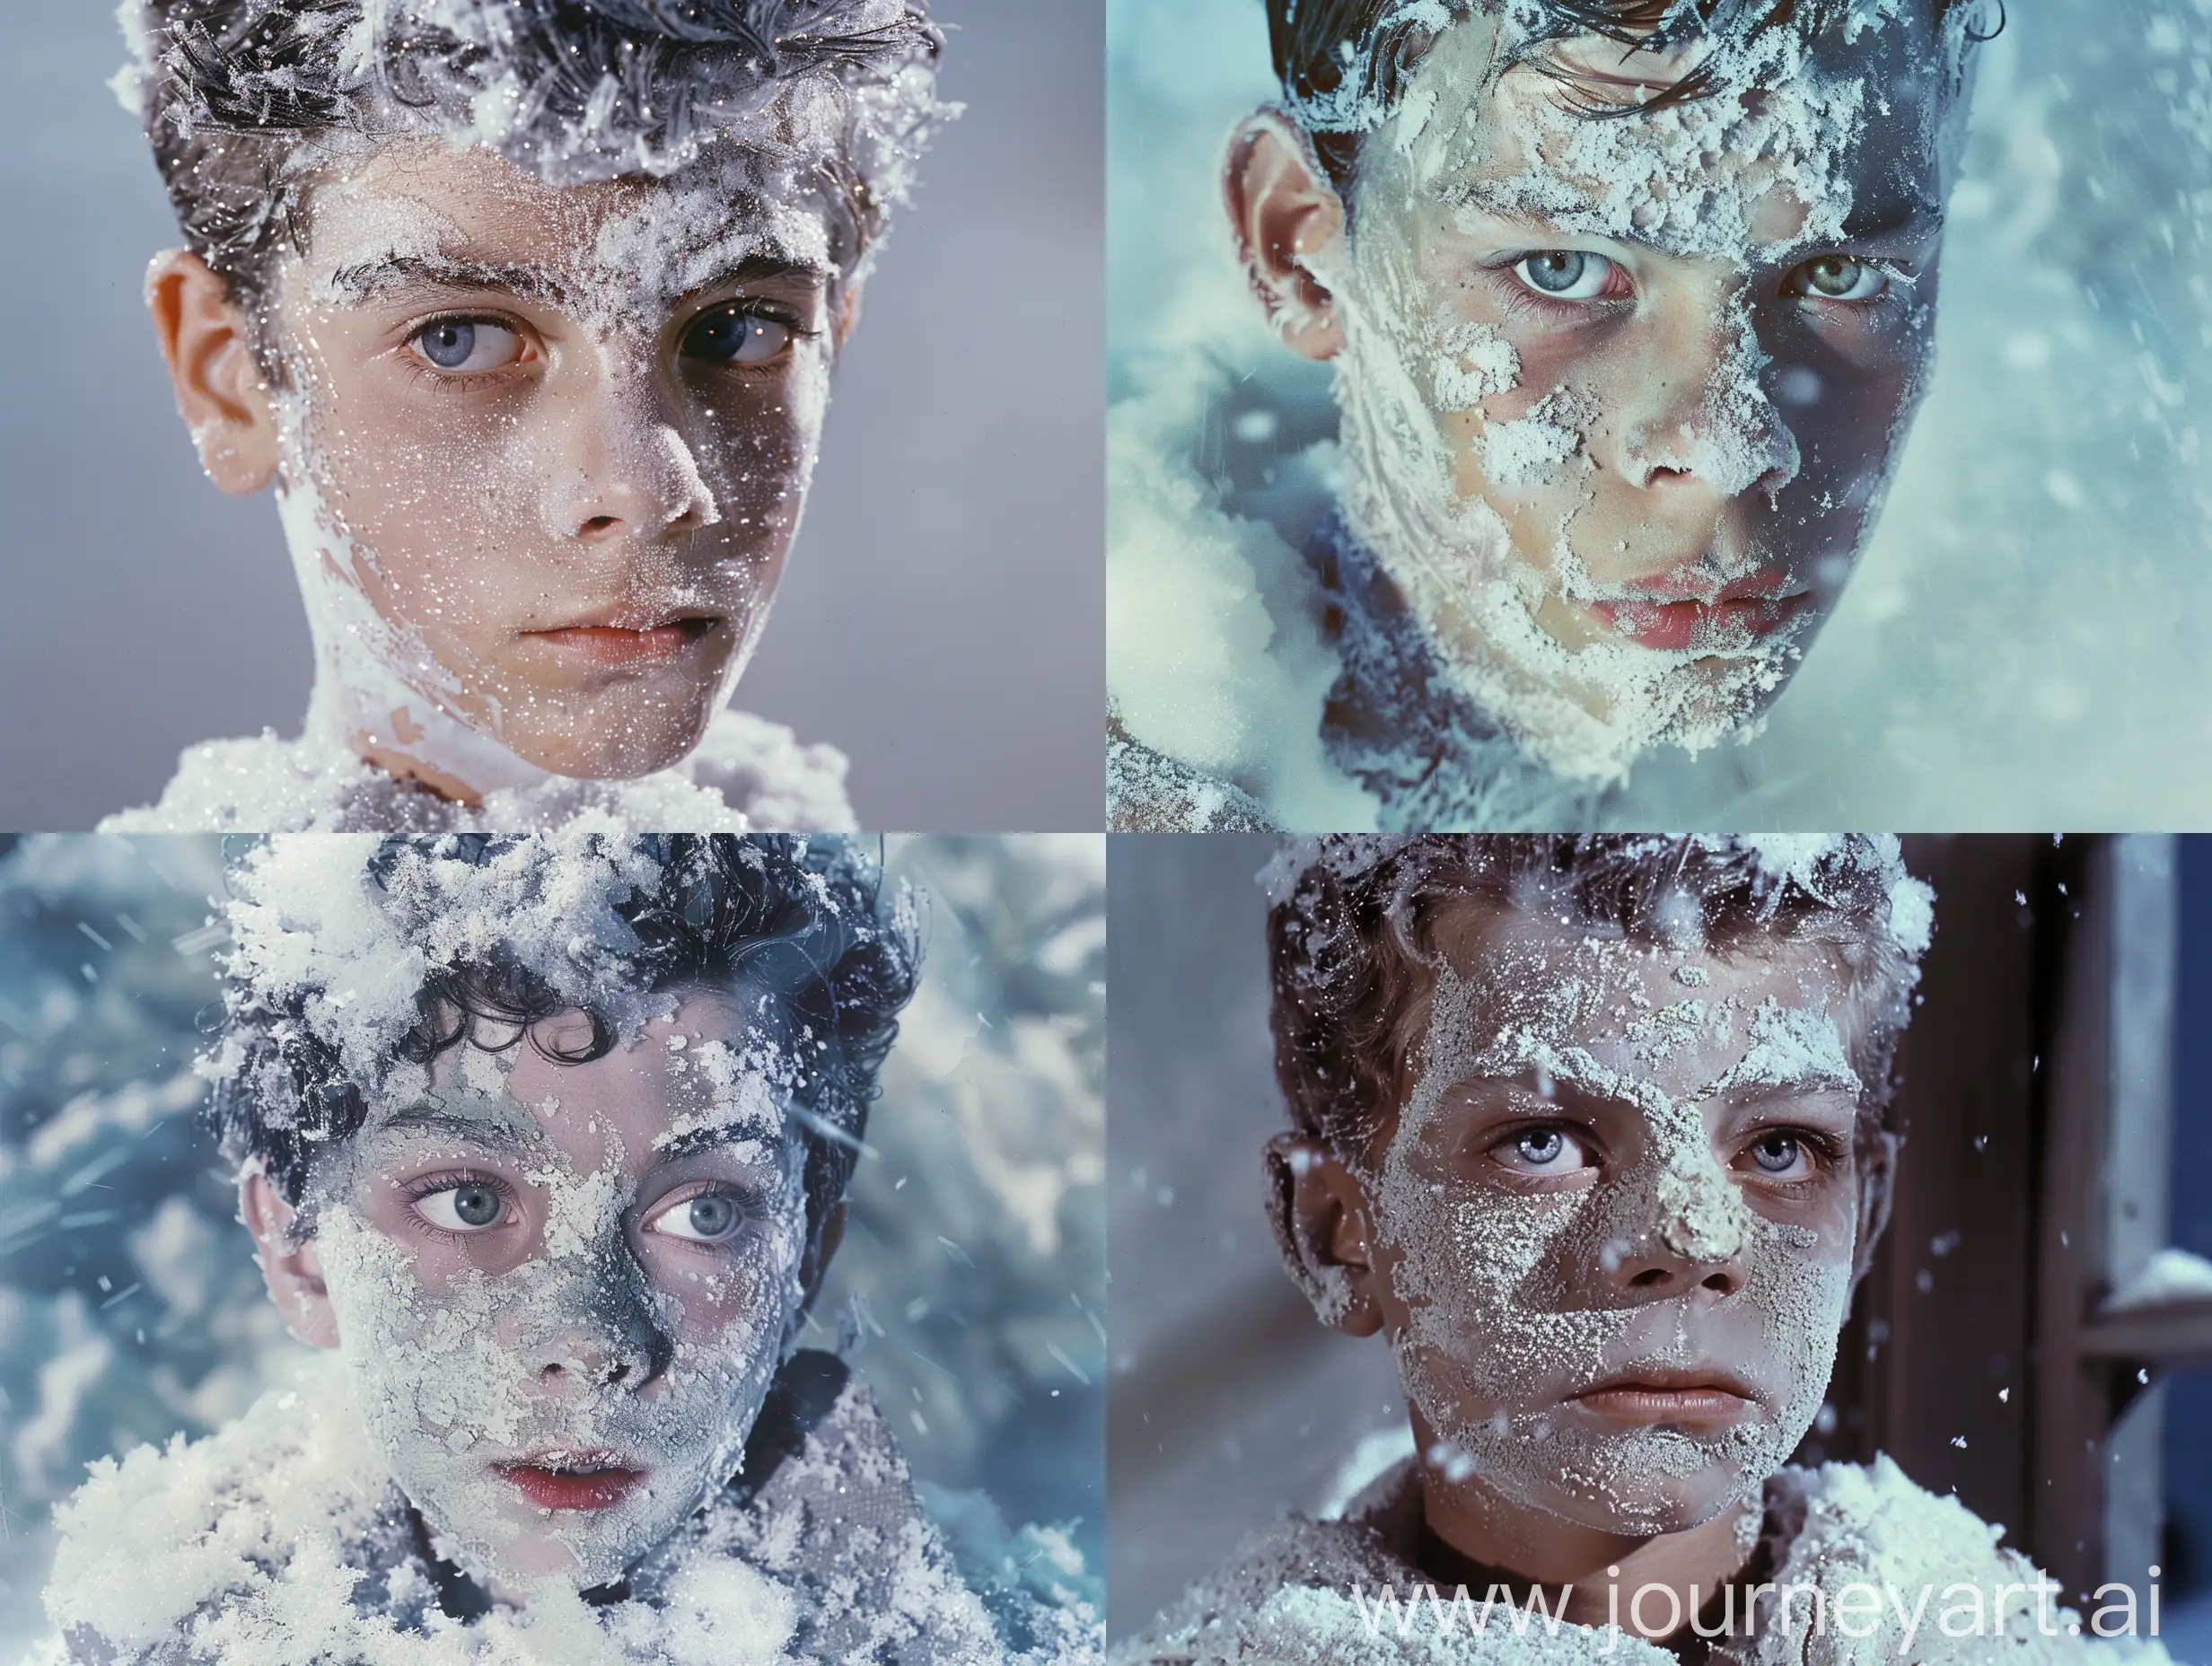 Snowy-Teenager-Titan-in-1950s-Superpanavision-70-Colory-Image